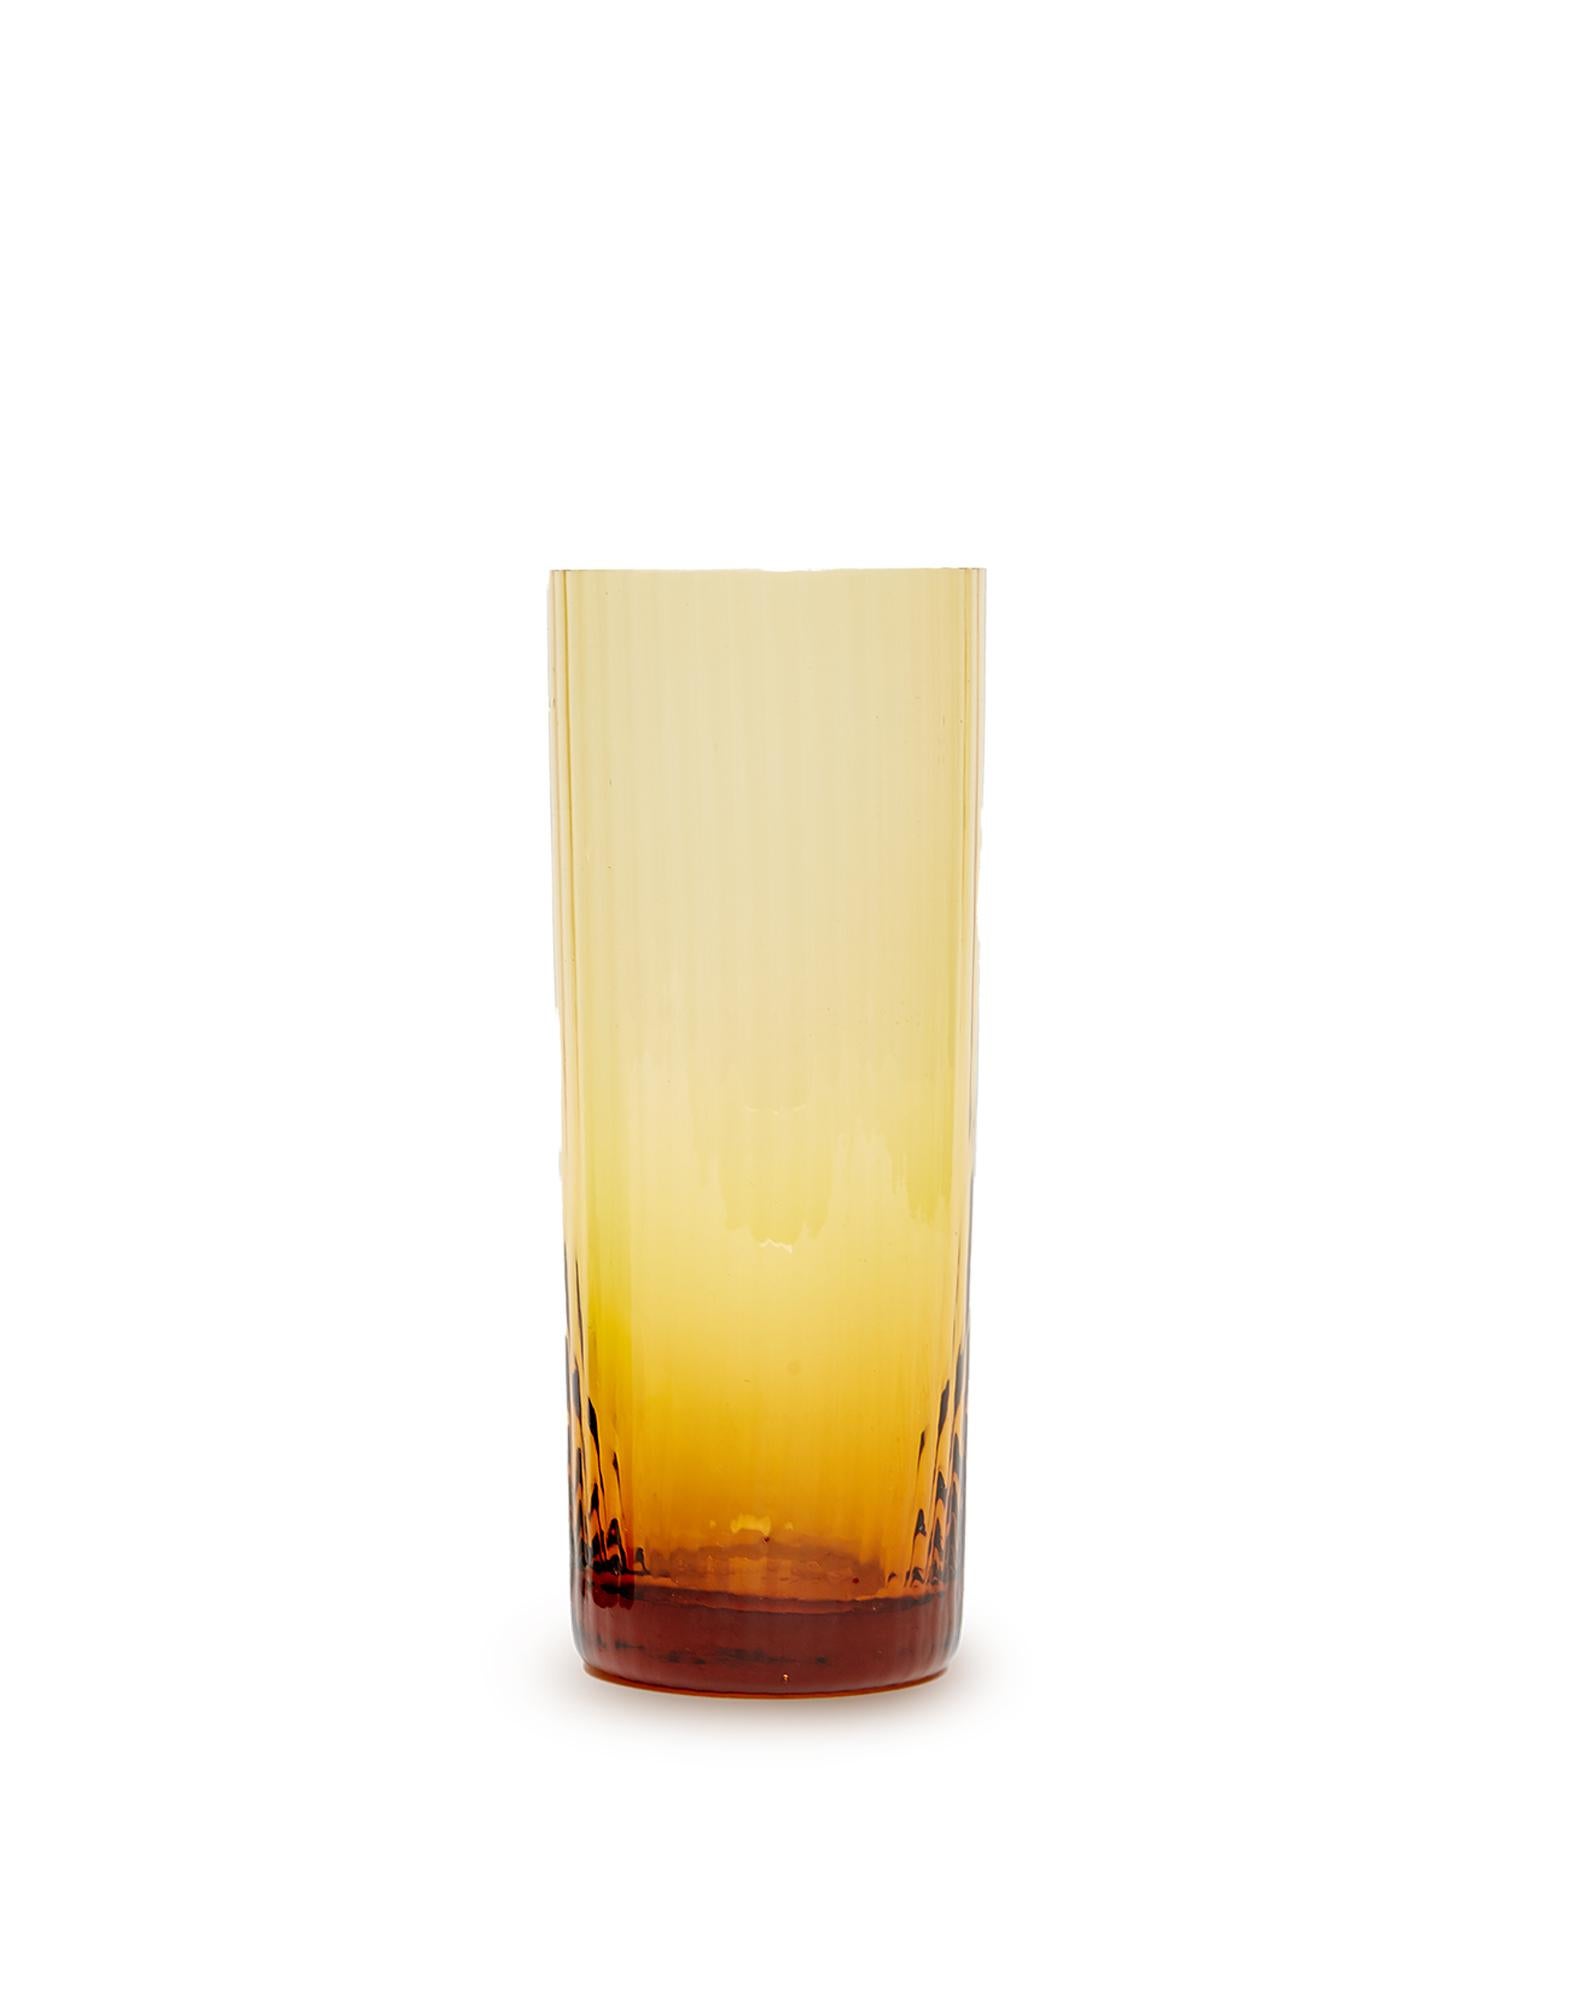 We imagine these rainbow Murano tumblers casting colorful shadows across your dreamy al fresco dinner table in the setting sun. The slender shape is perfect for a long, cool, drink - we’re thinking Aperol spritz, G&Ts, seltzers, that kind of thing.